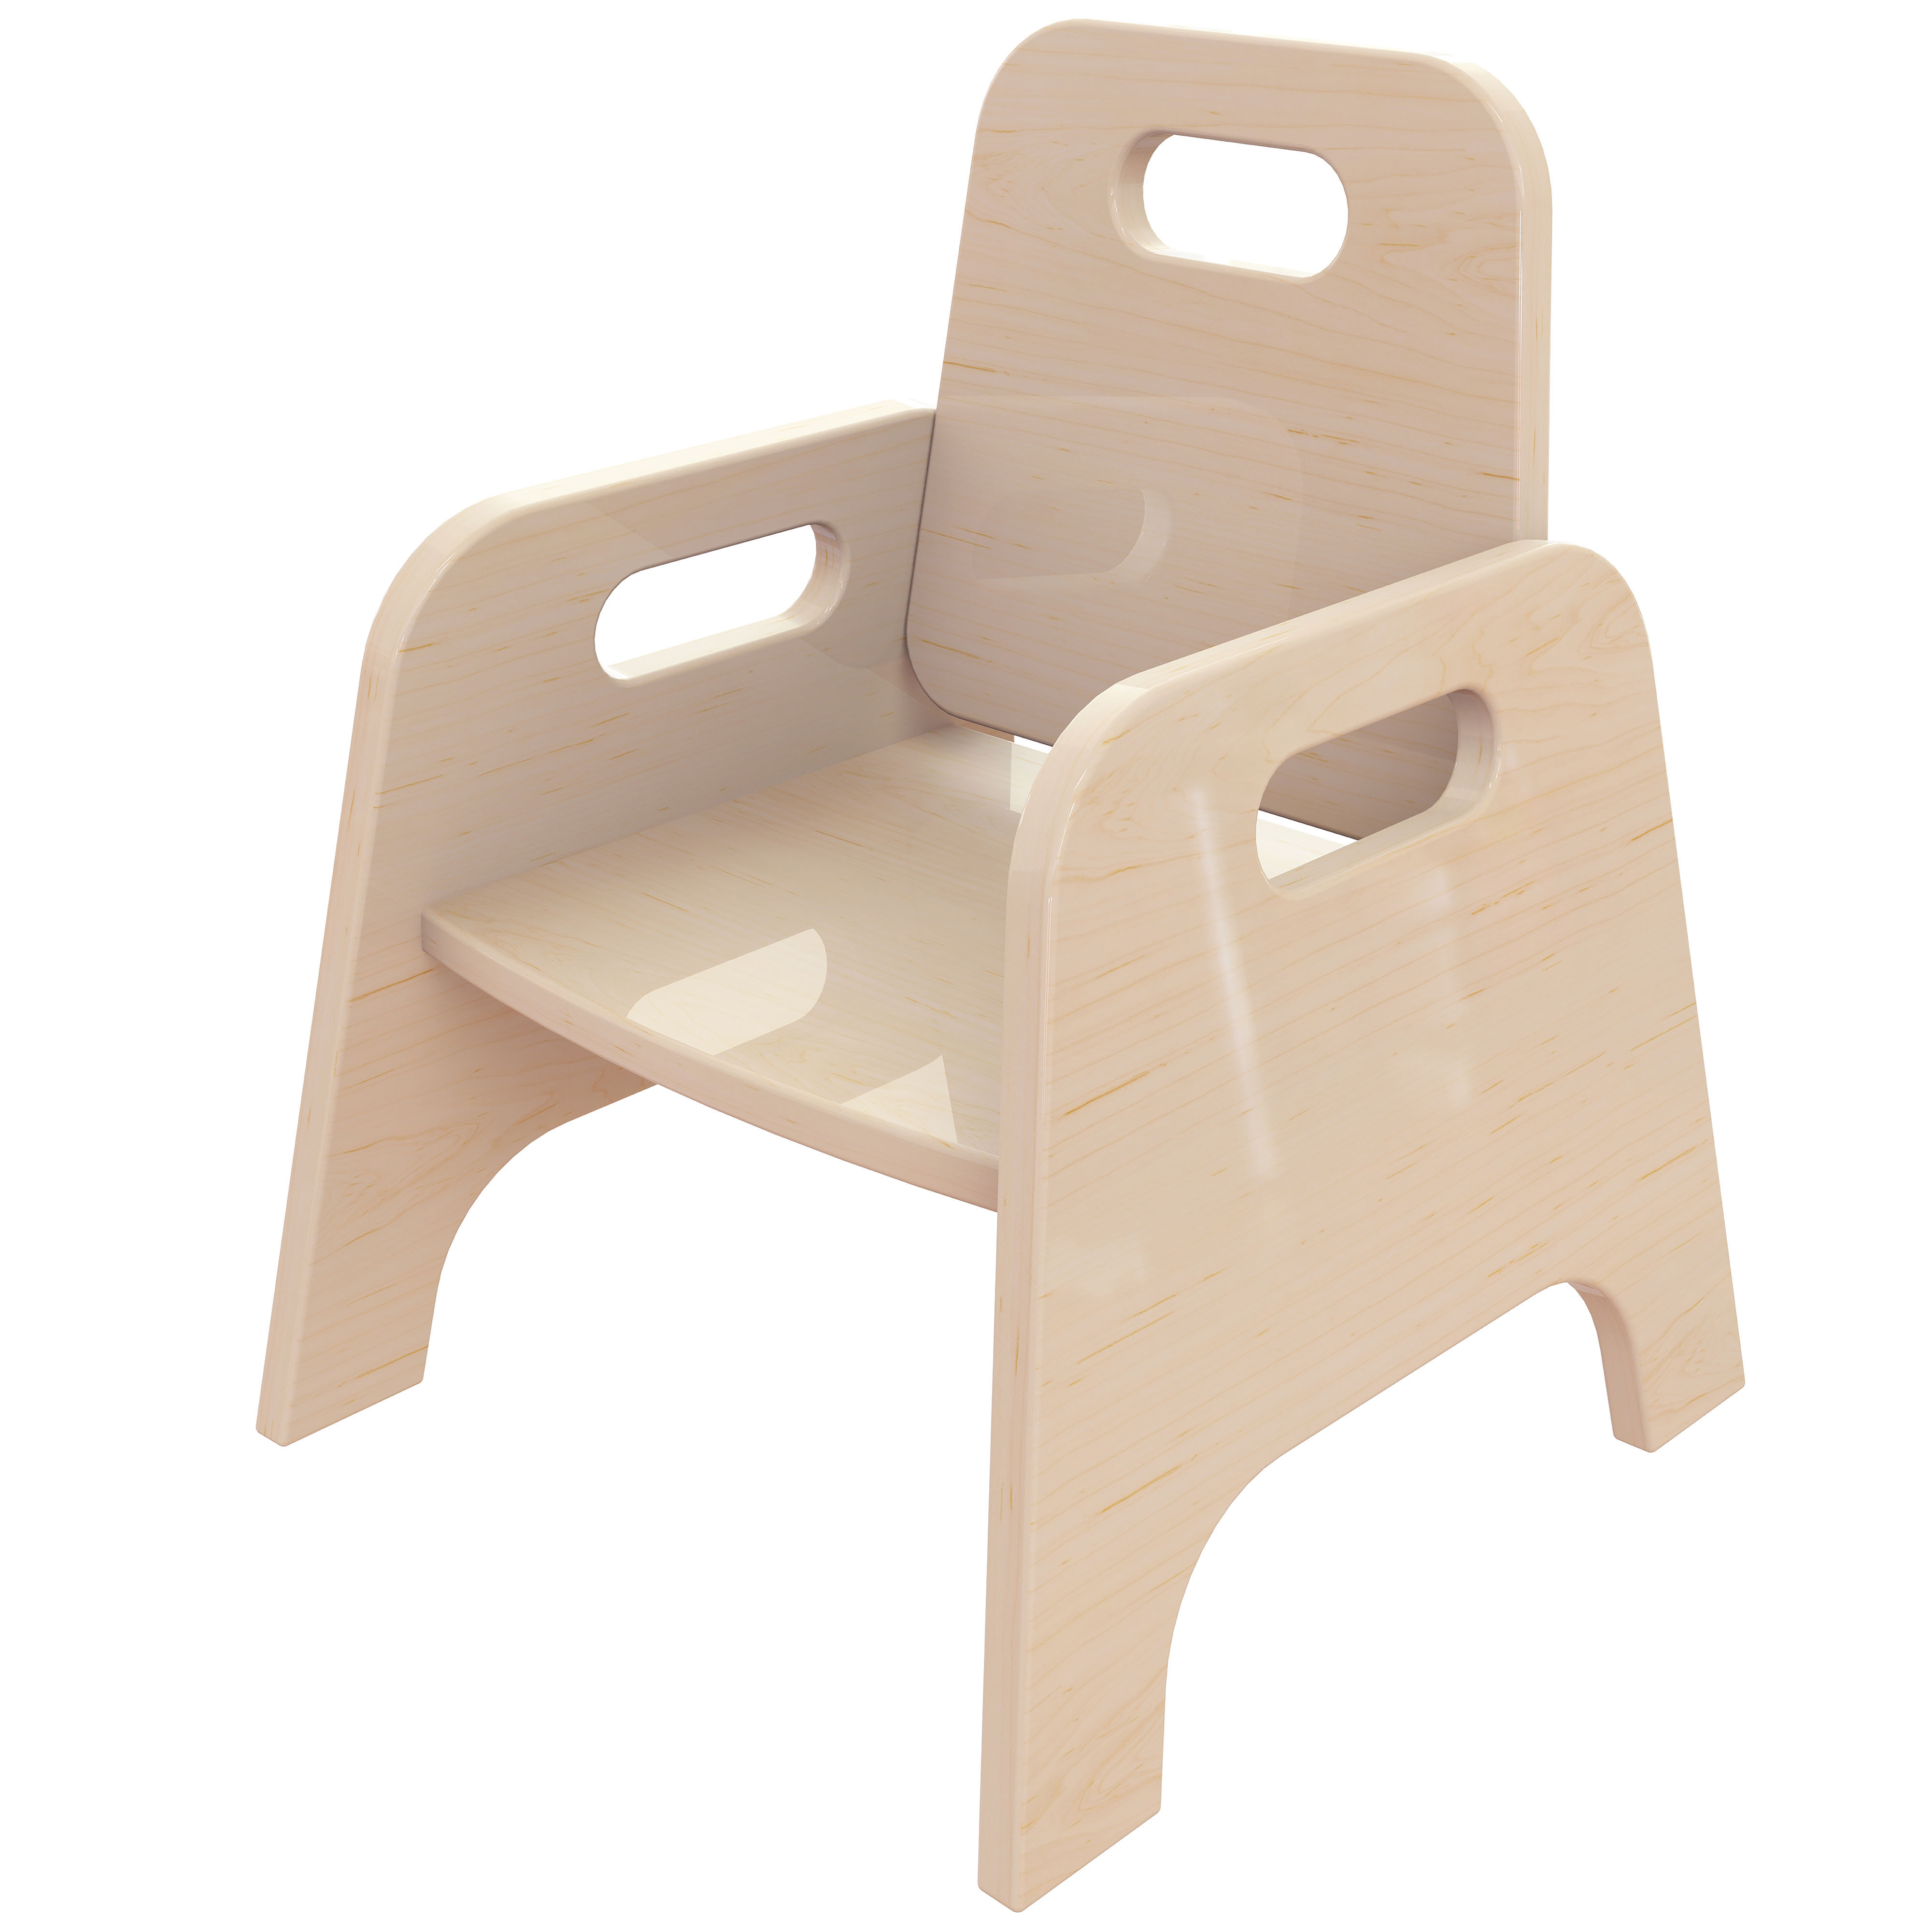 Wooden Toddler Chairs Pack Of 2 Early Learning Furniture